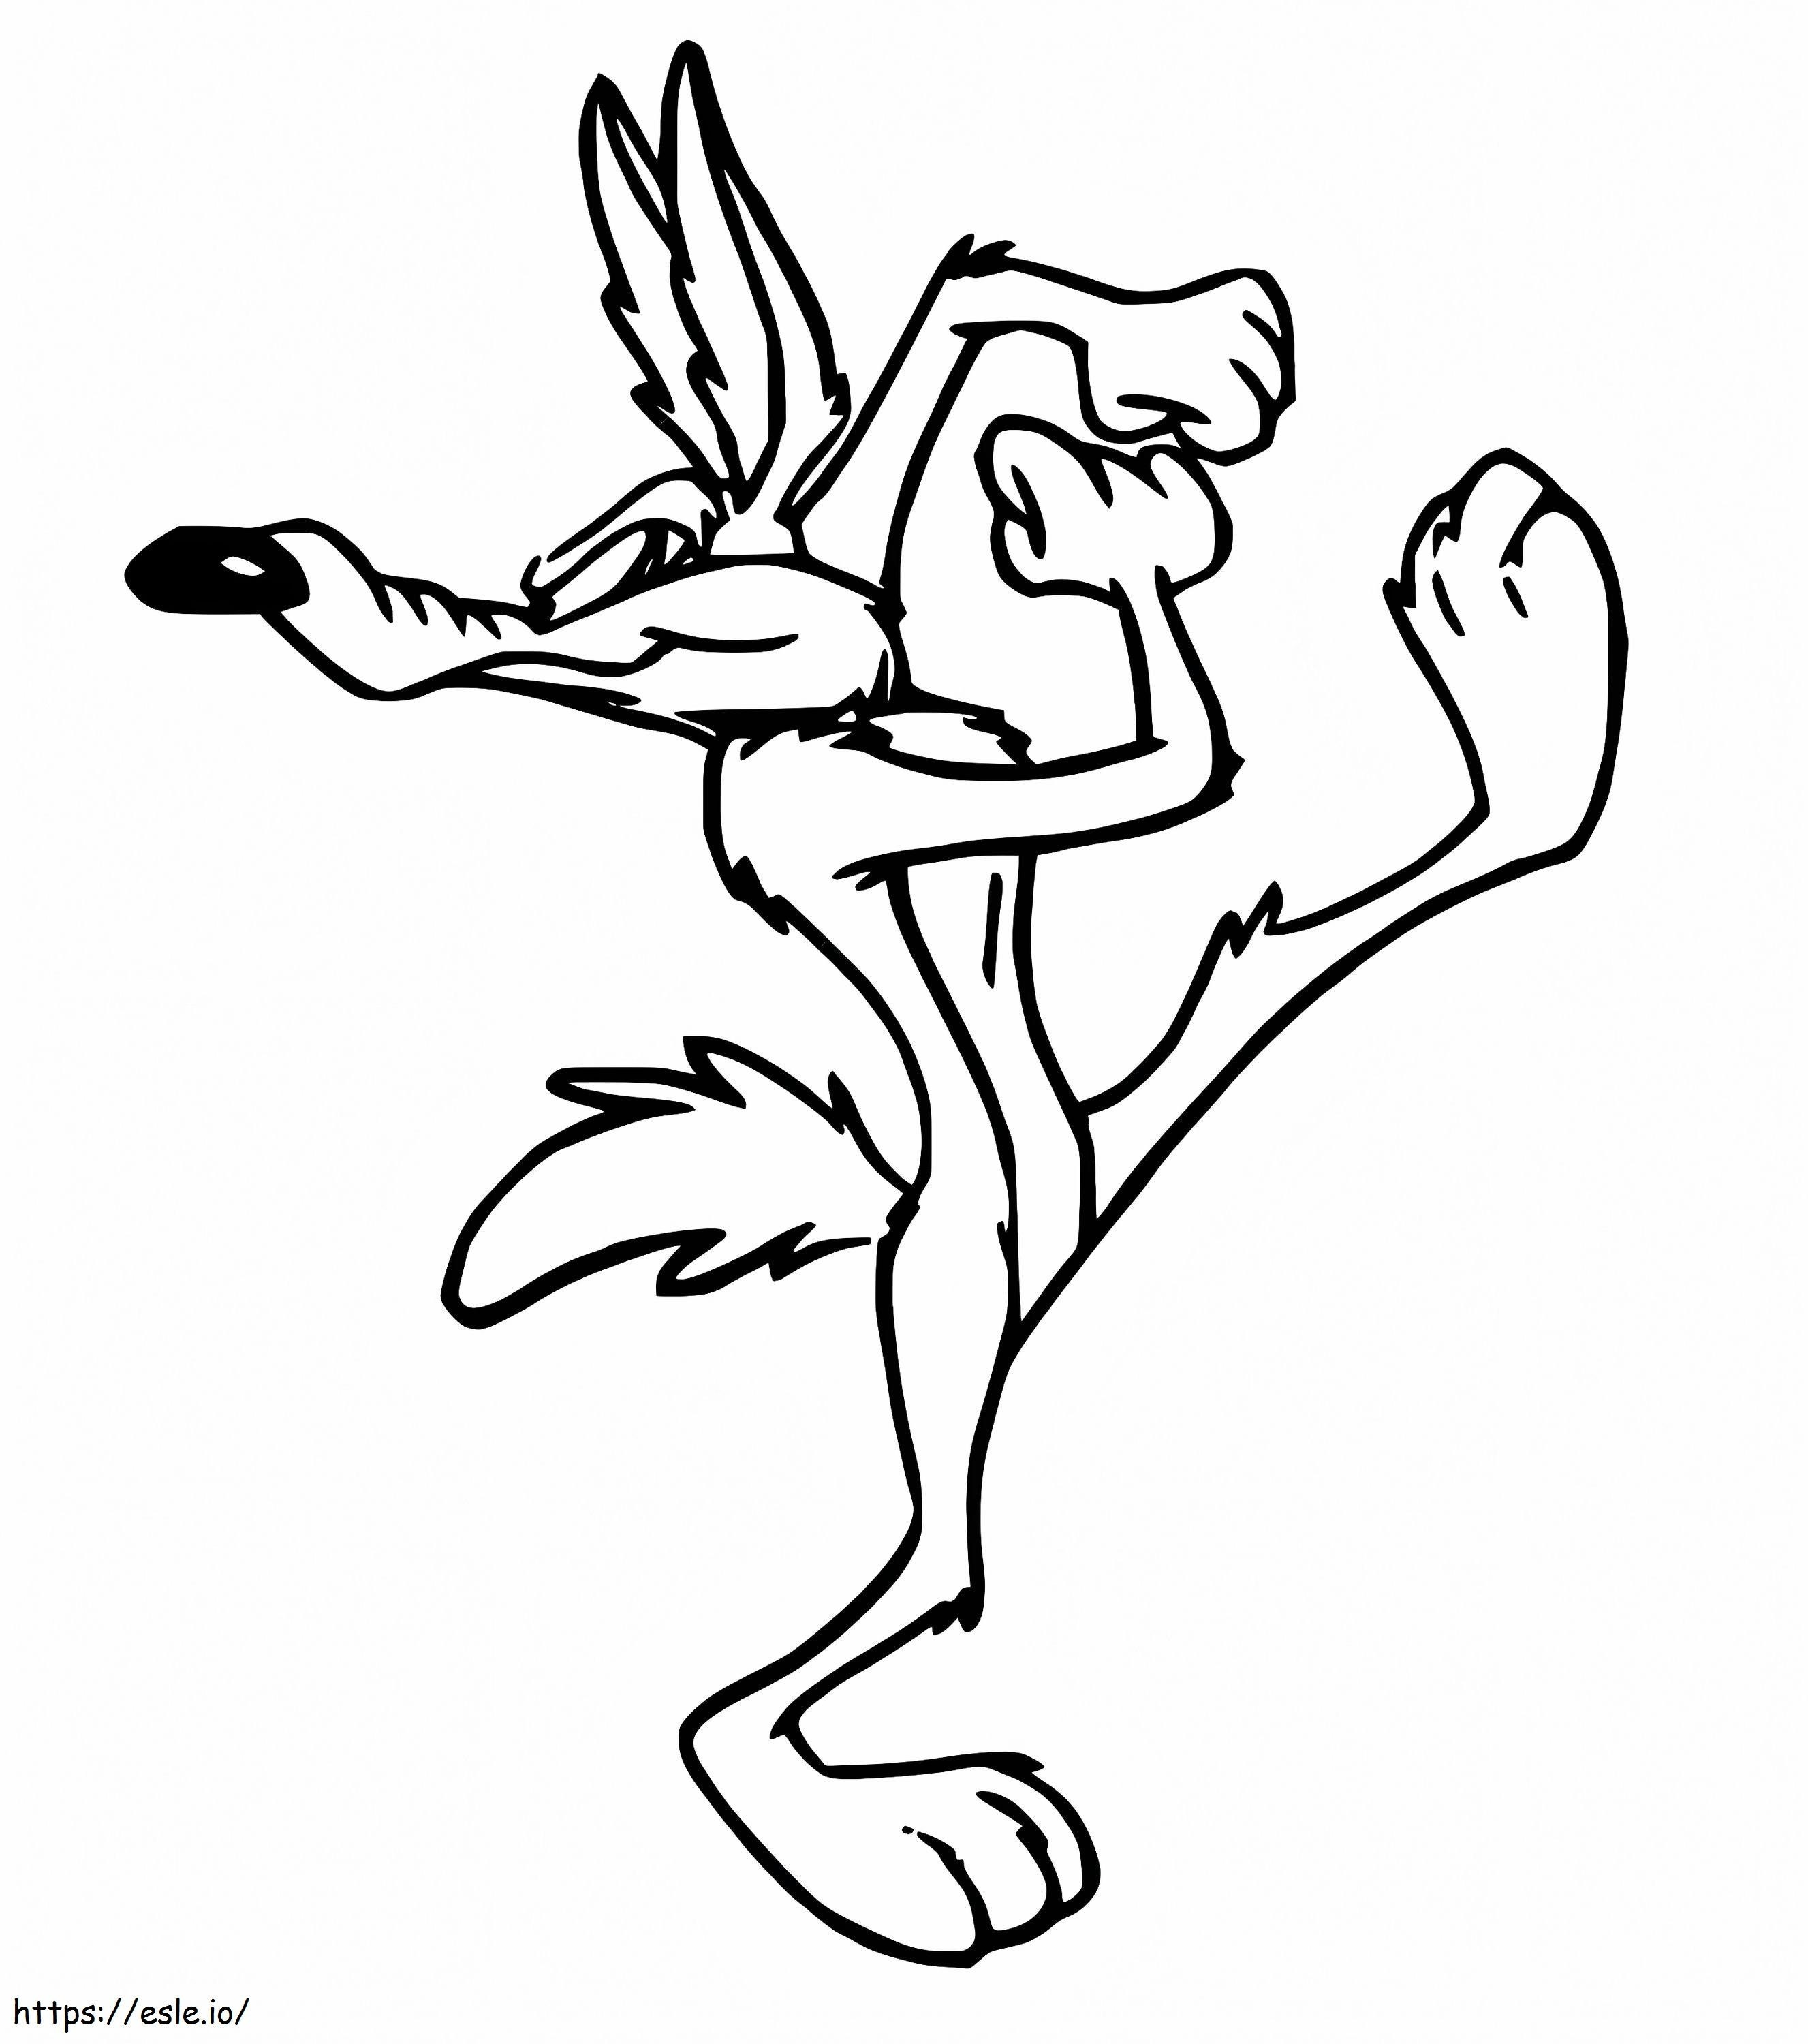 Print Wile E Coyote coloring page